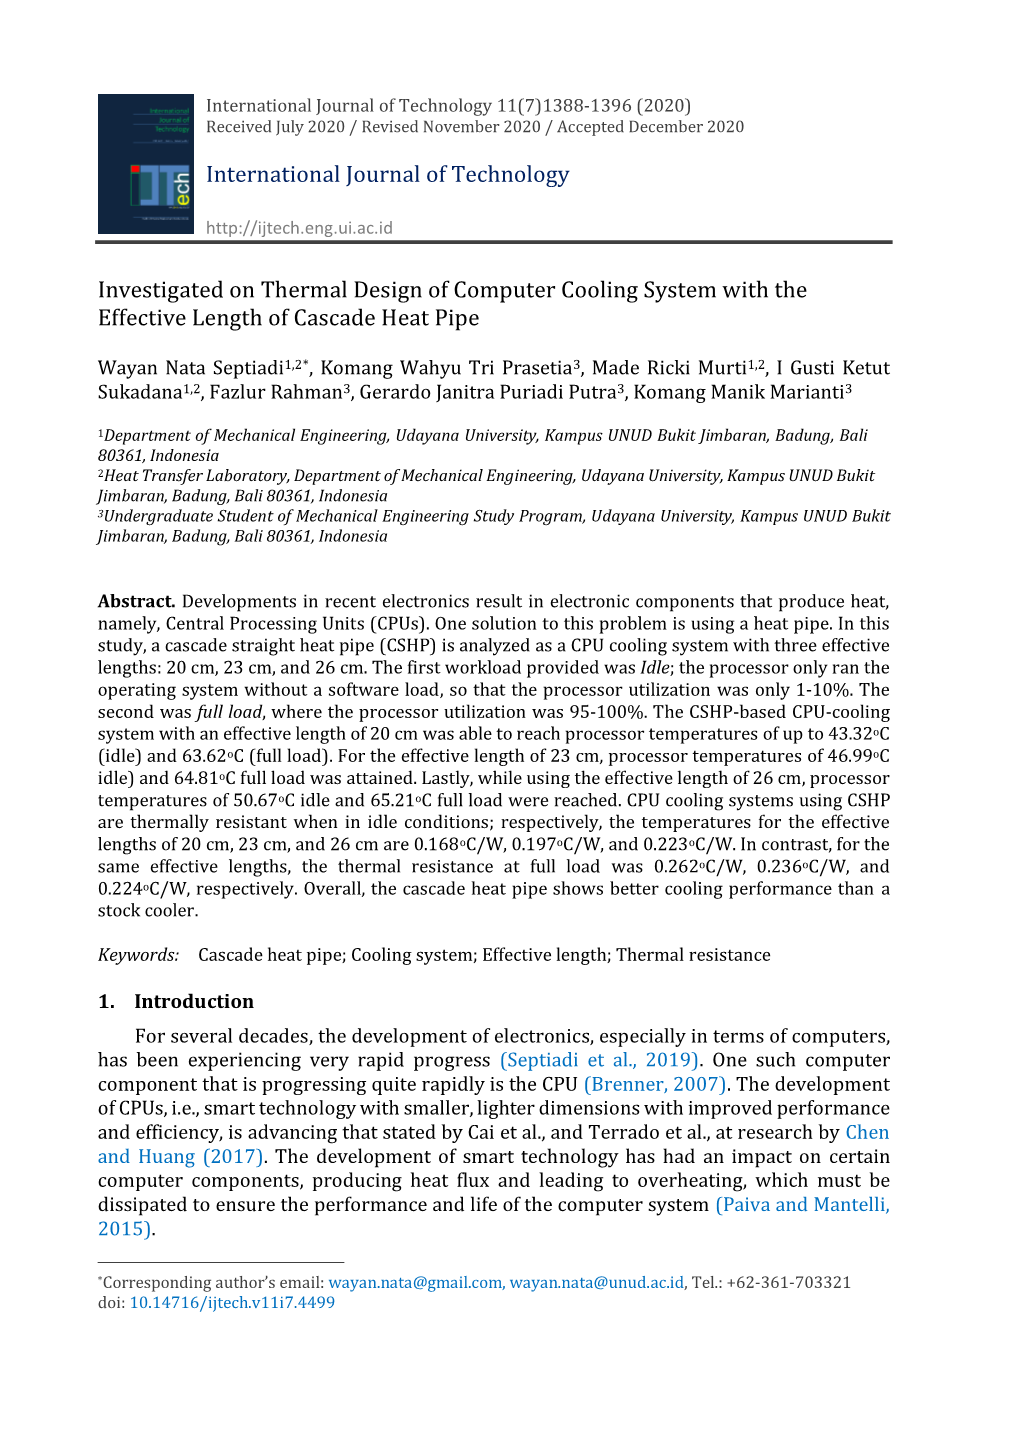 Investigated on Thermal Design of Computer Cooling System with the Effective Length of Cascade Heat Pipe